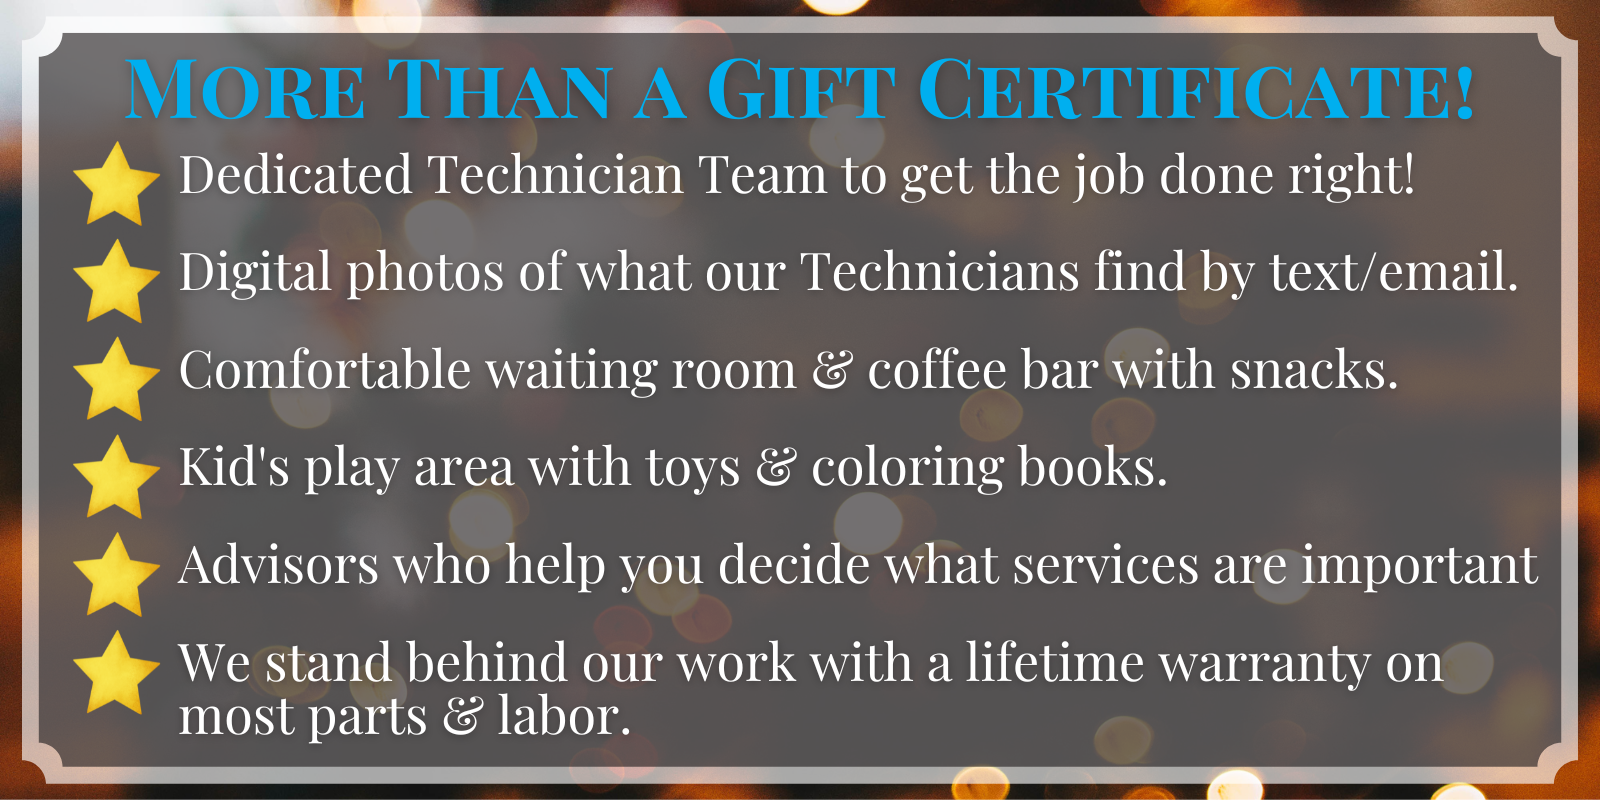 What do you get with service at Graham Auto Repair in Graham, WA and Yelm, WA?